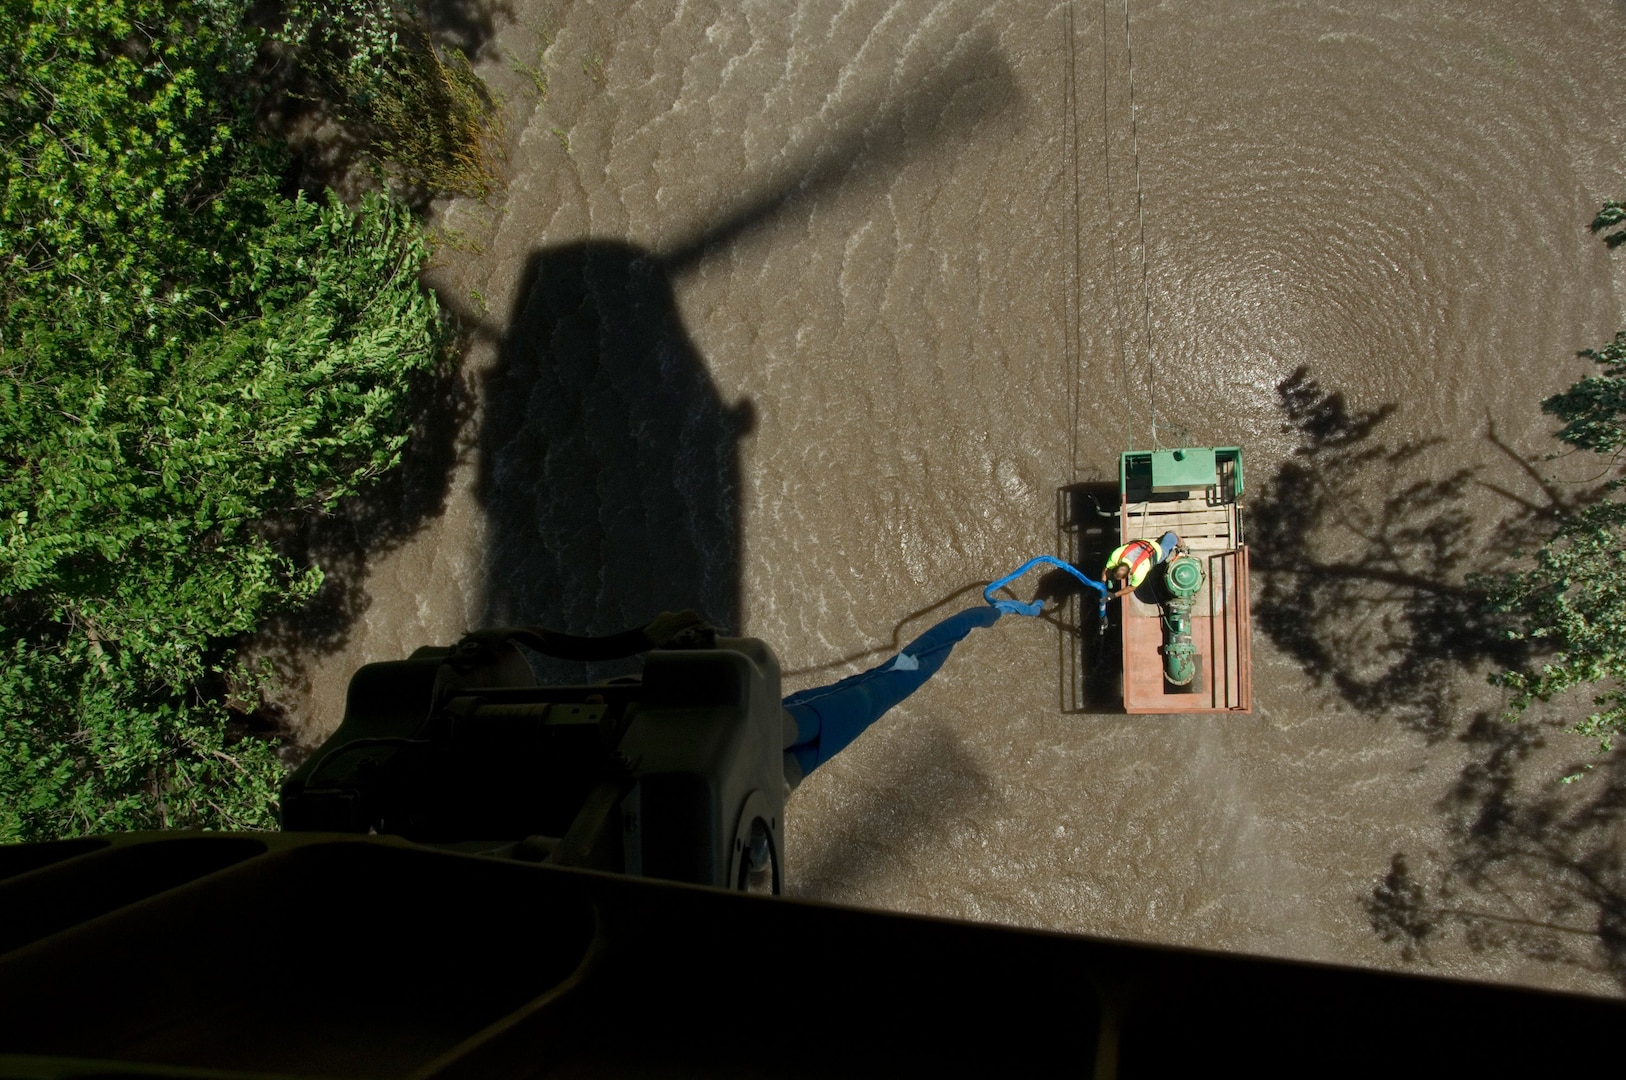 An employee from the Cedar Rapids Water Utility prepares to attach a lift cable from an Iowa Army National Guard CH-47 Chinook to a damaged water pump on the Iowa River near Cedar Rapids, Iowa. The CH-47 from Bravo Company, 2-11 General Aviation Support Battalion was used recover several water pumps in need of repair following massive flooding caused by heavy rains in Iowa. The pumps will be repaired and put back in place to provide fresh water for the residents of Cedar Rapids.